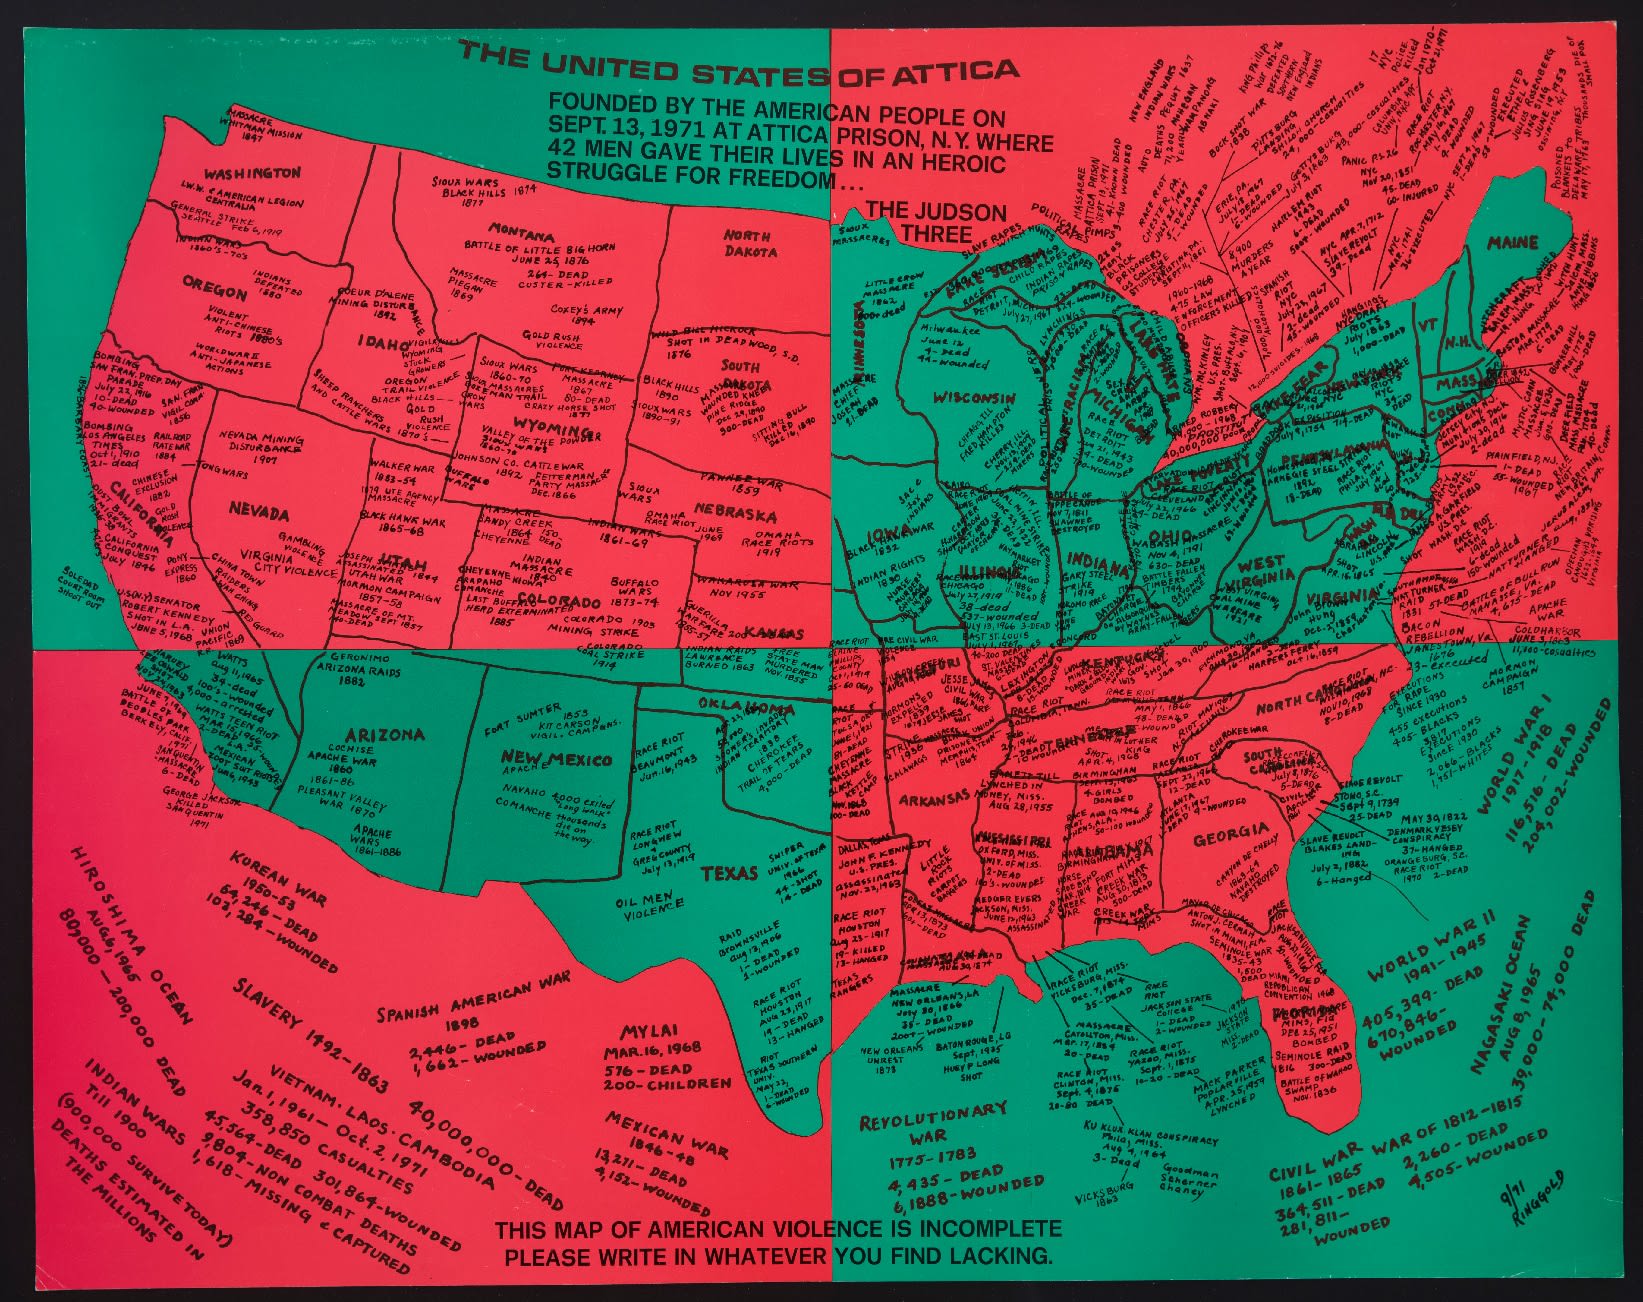 Rokhaya Diallo Responds to Faith Ringgold’s Map of Violence in America